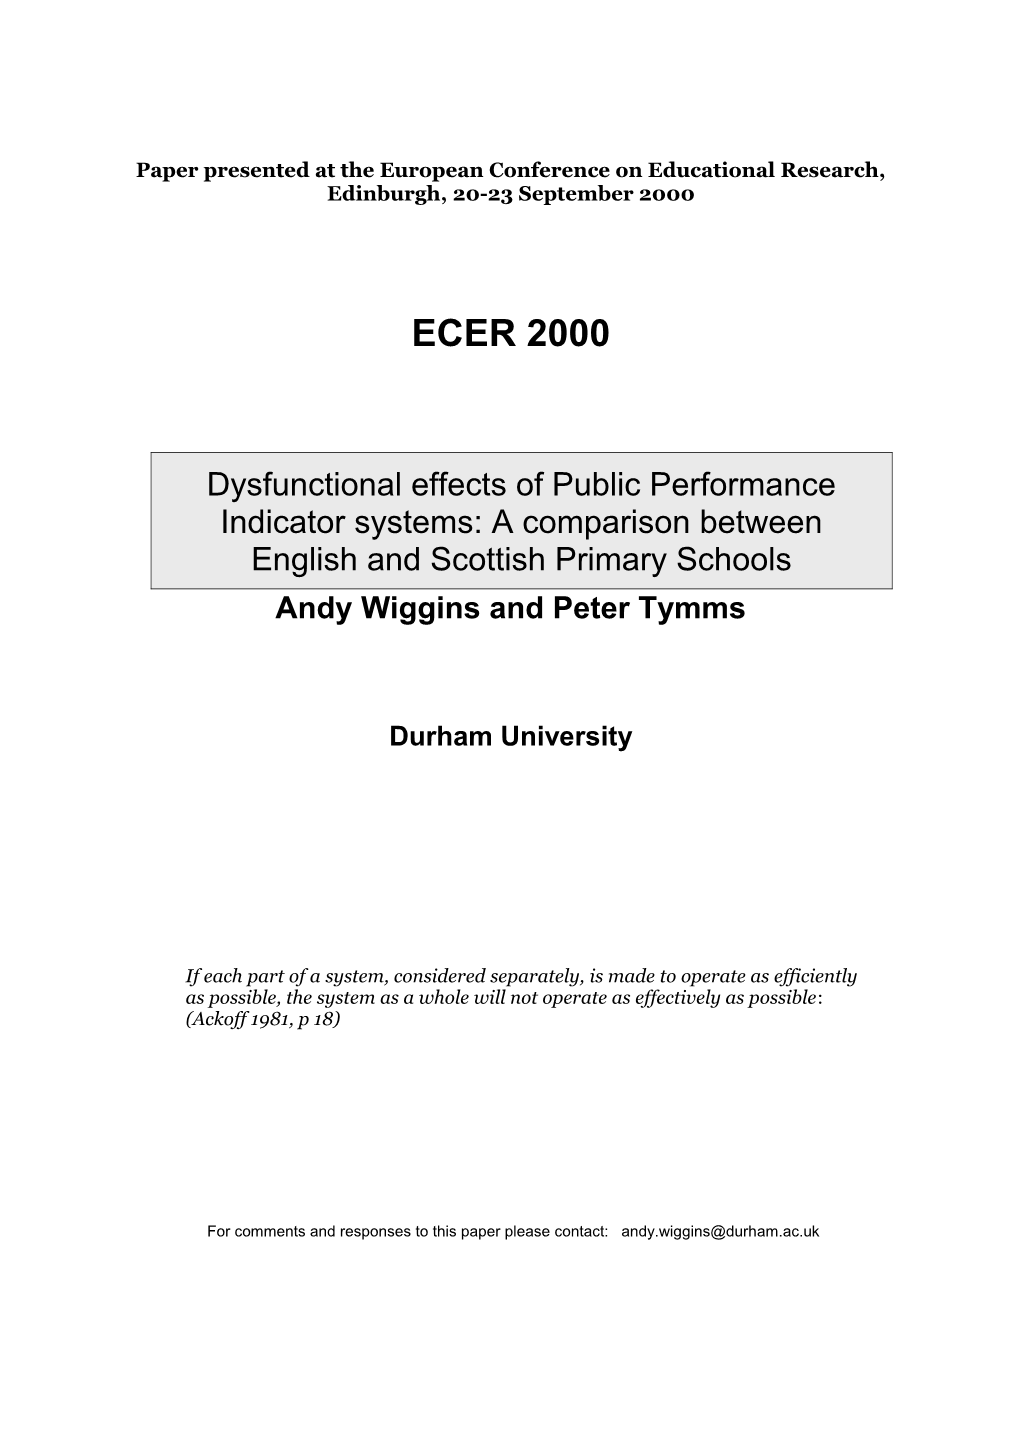 Ysfunctional Influences of Public Performance Indicators: a Comparison Between English